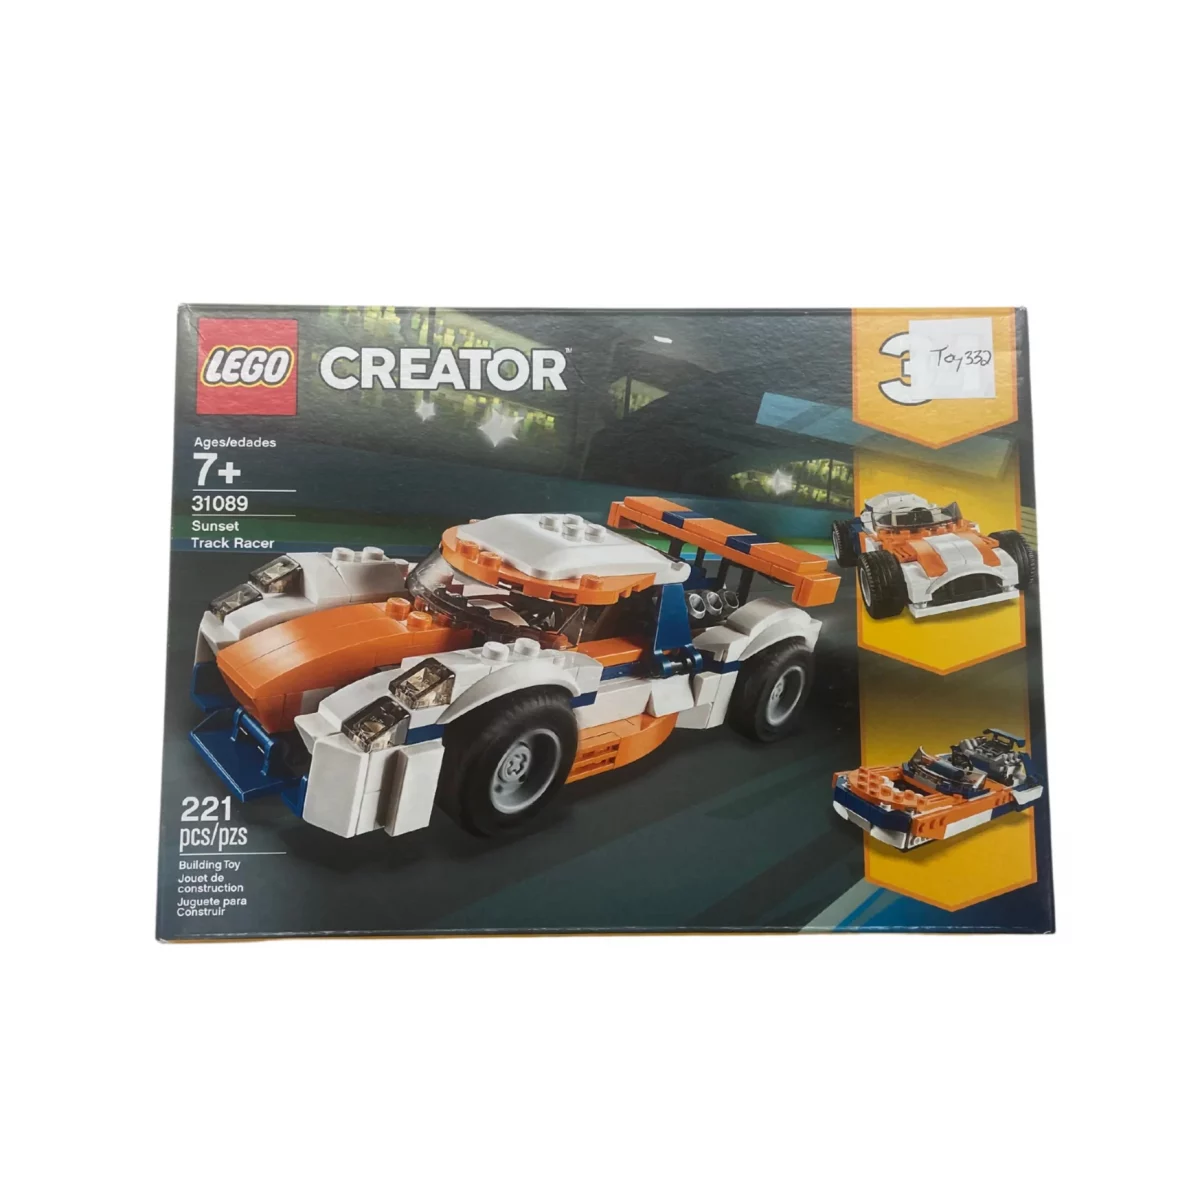 Lego Creator: Sunset Track Racer / 221 Piece / Ages 7+ / 31089 **DEALS**